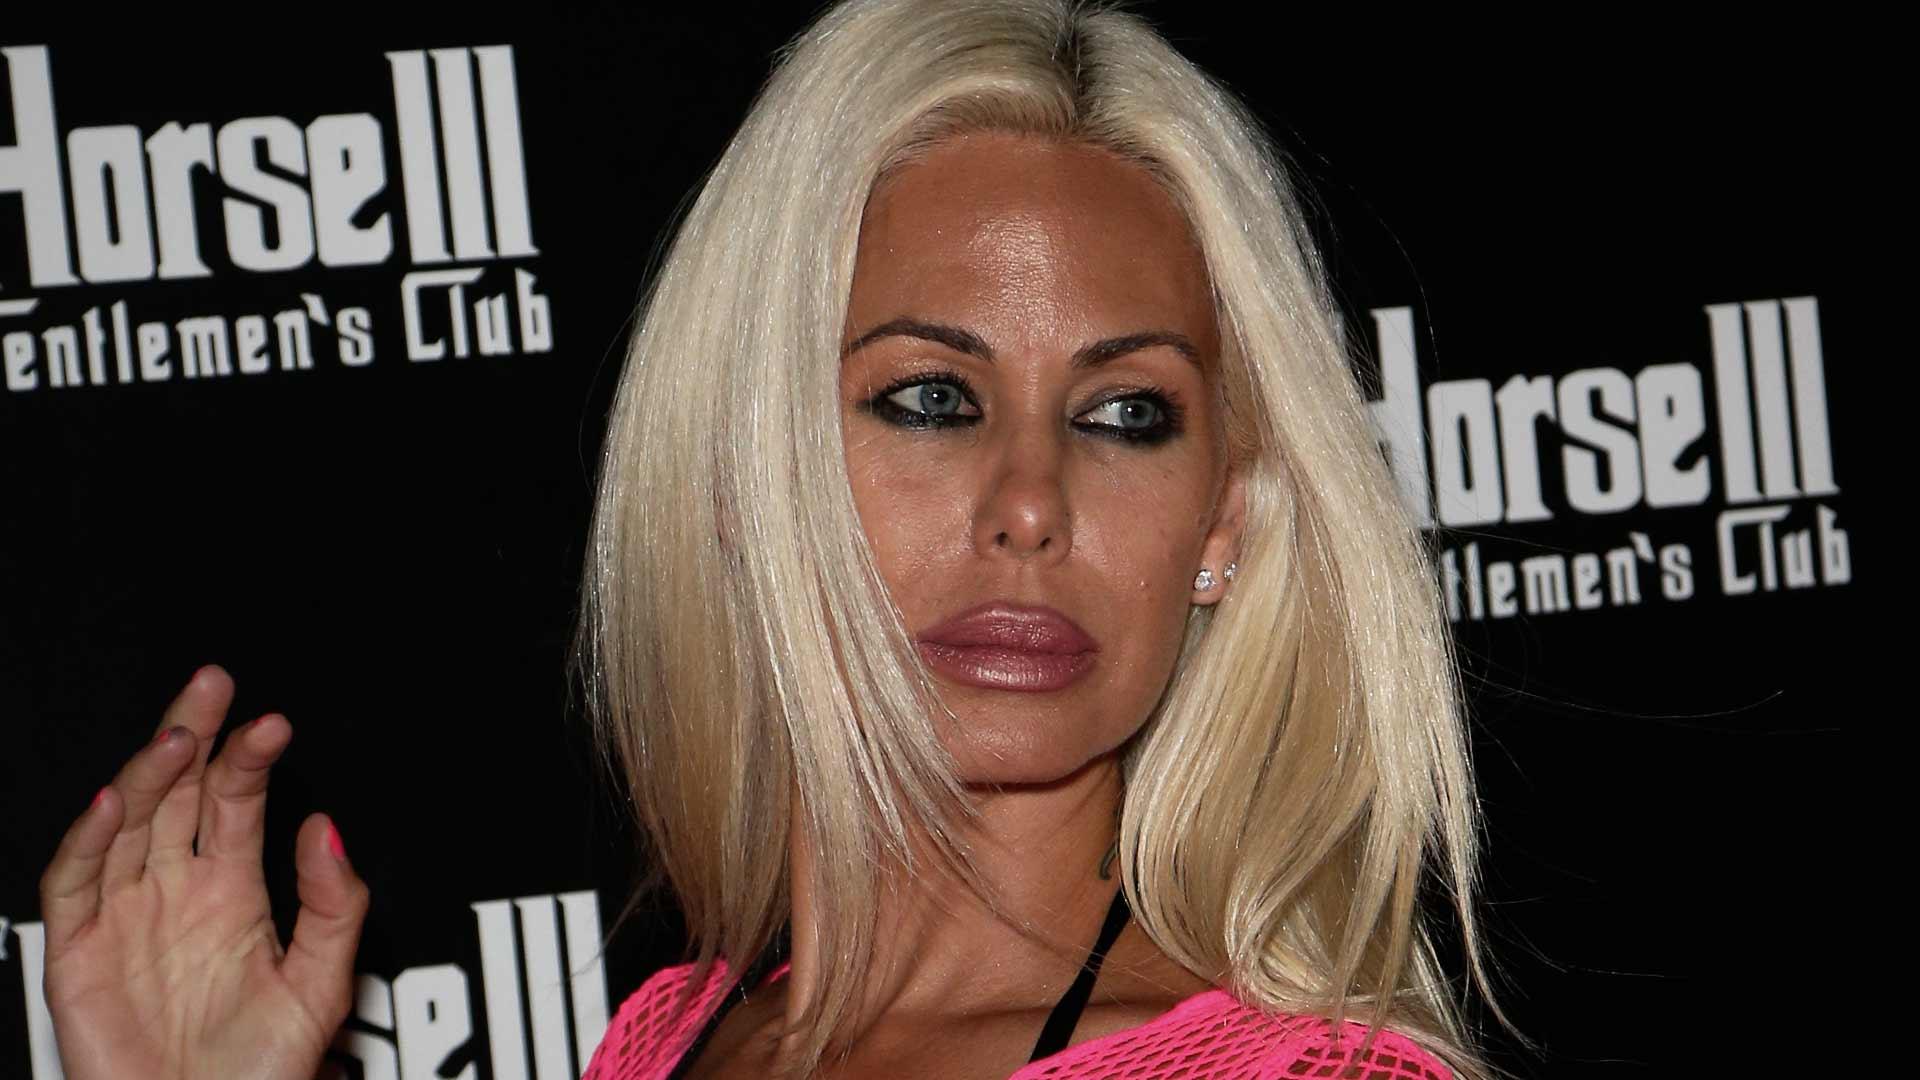 Shauna Sand Claims Husband Strangled and Threatened to Kill Her in Drug-Fueled Rage